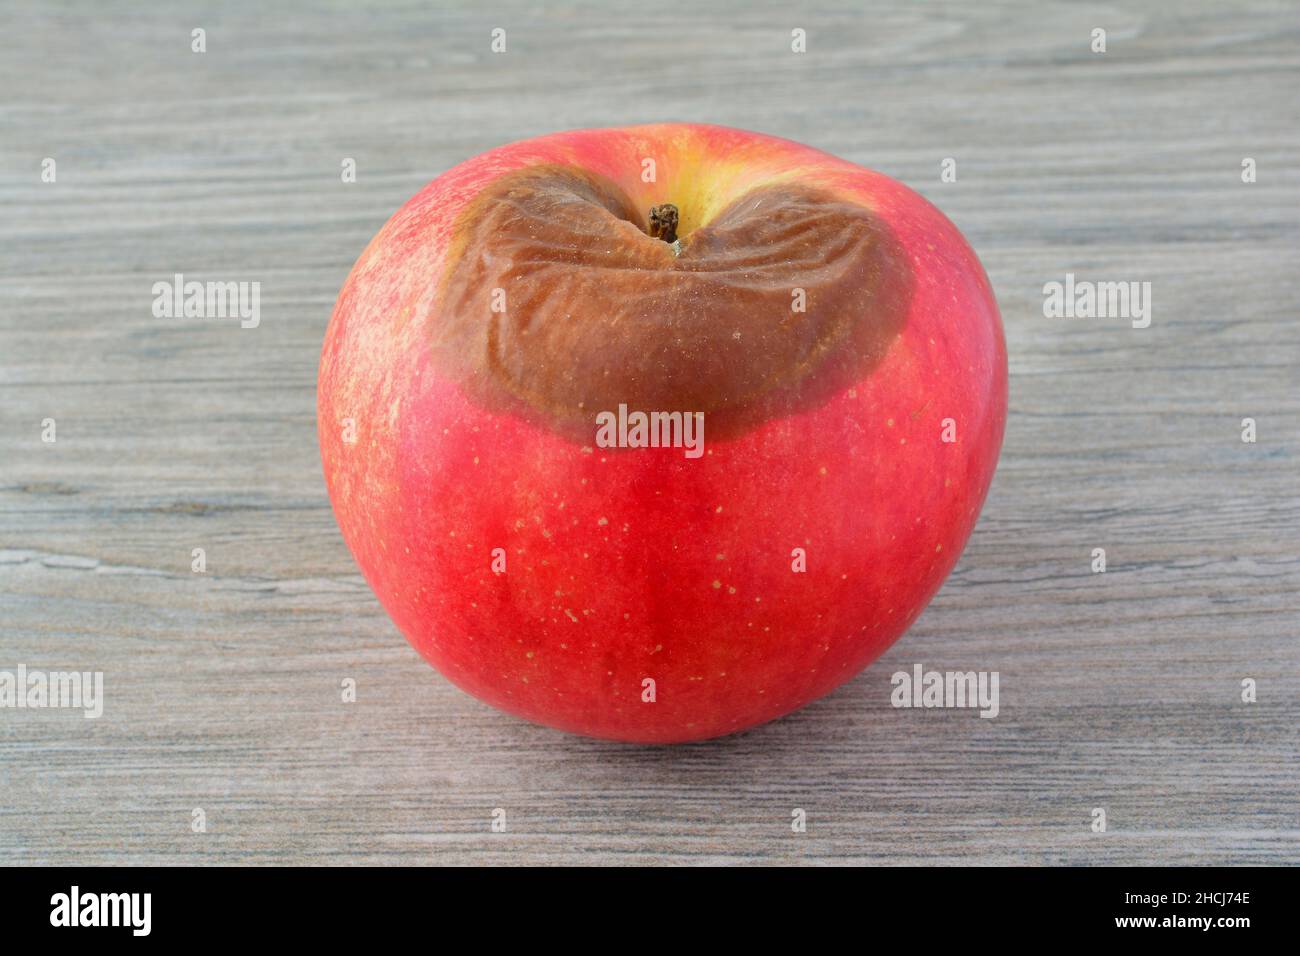 Red rotten apple on grey wooden background, close up view Stock Photo